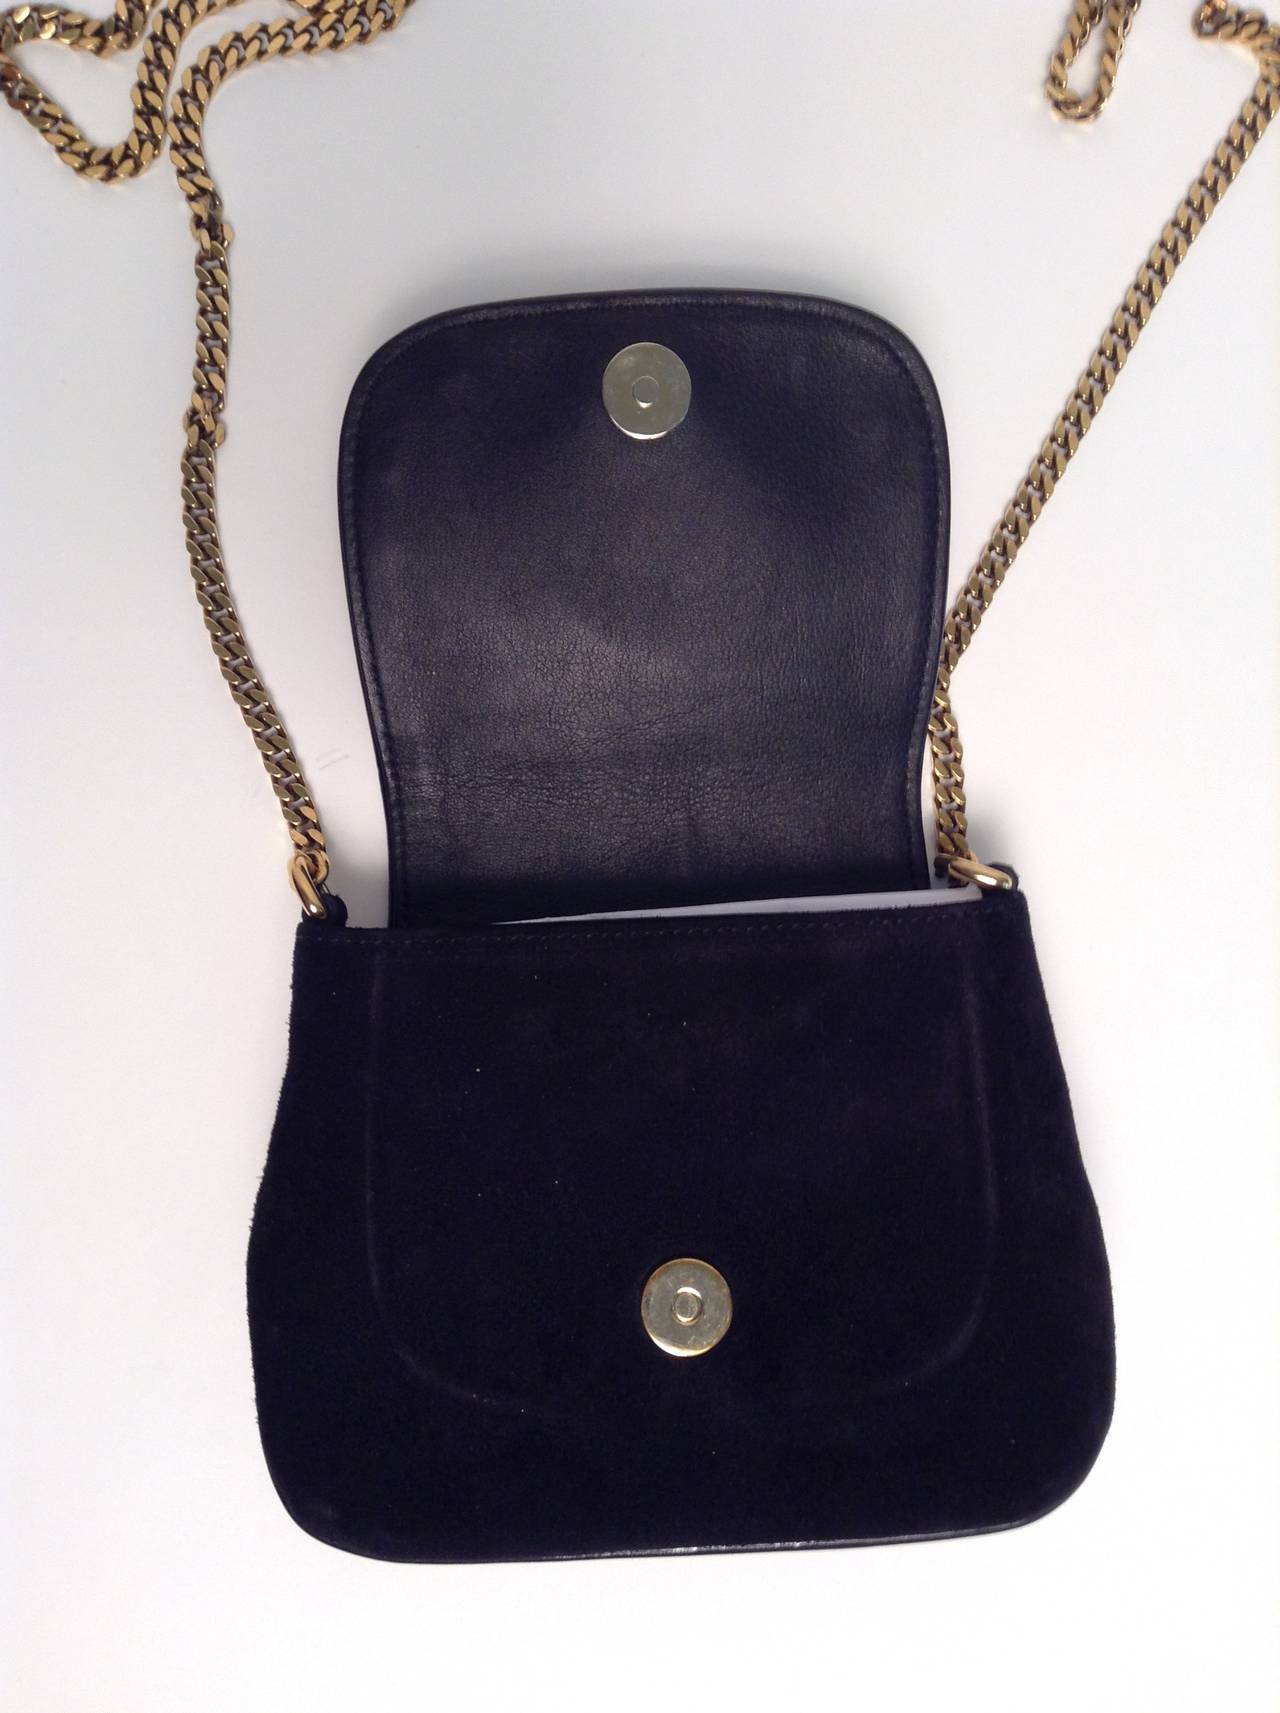 Gucci Black Suede Gold Chain Bag 1973 Reissue 6